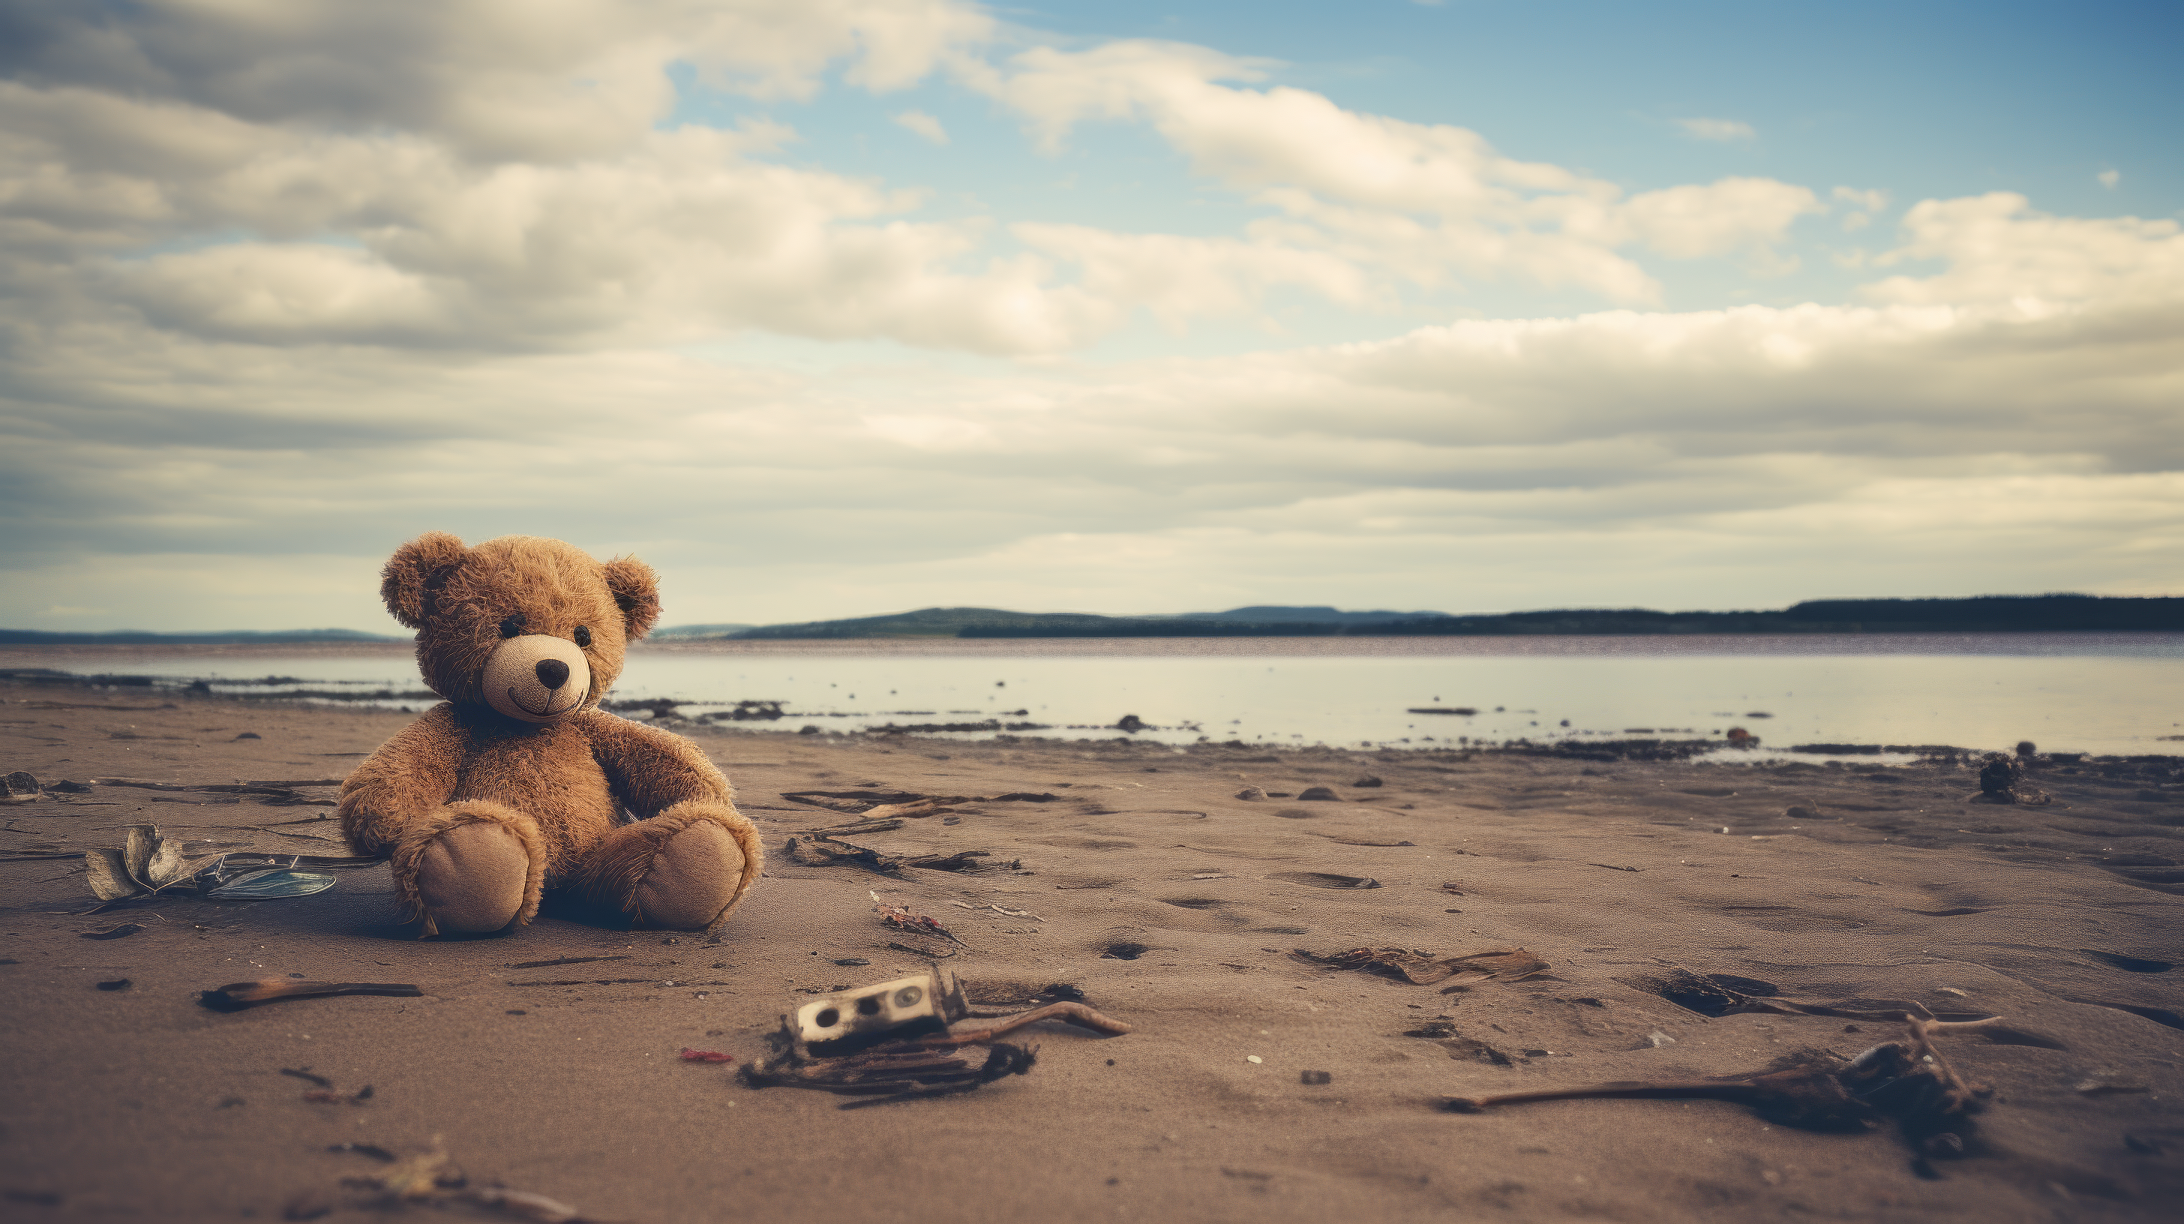 Lonely teddy bear sitting on a sandy beach with a cloudy sky backdrop, perfect for HD desktop wallpaper.